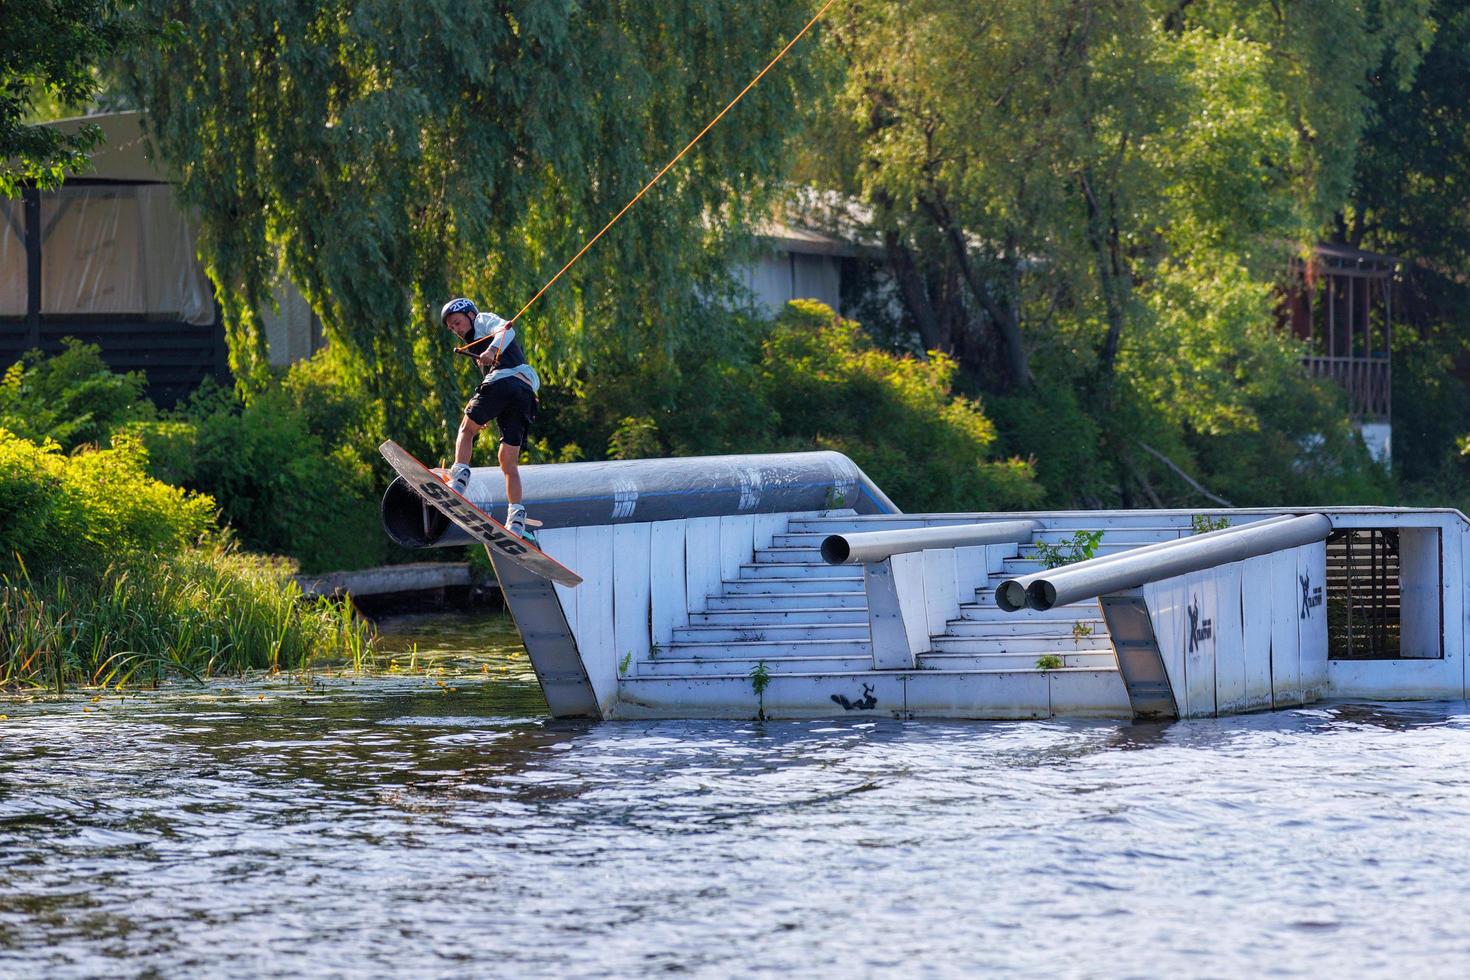 Kyiv. Ukraine. Jun.19, 2022. Athlete wakeboarder jumps from a springboard to the water surface on a summer day. photo